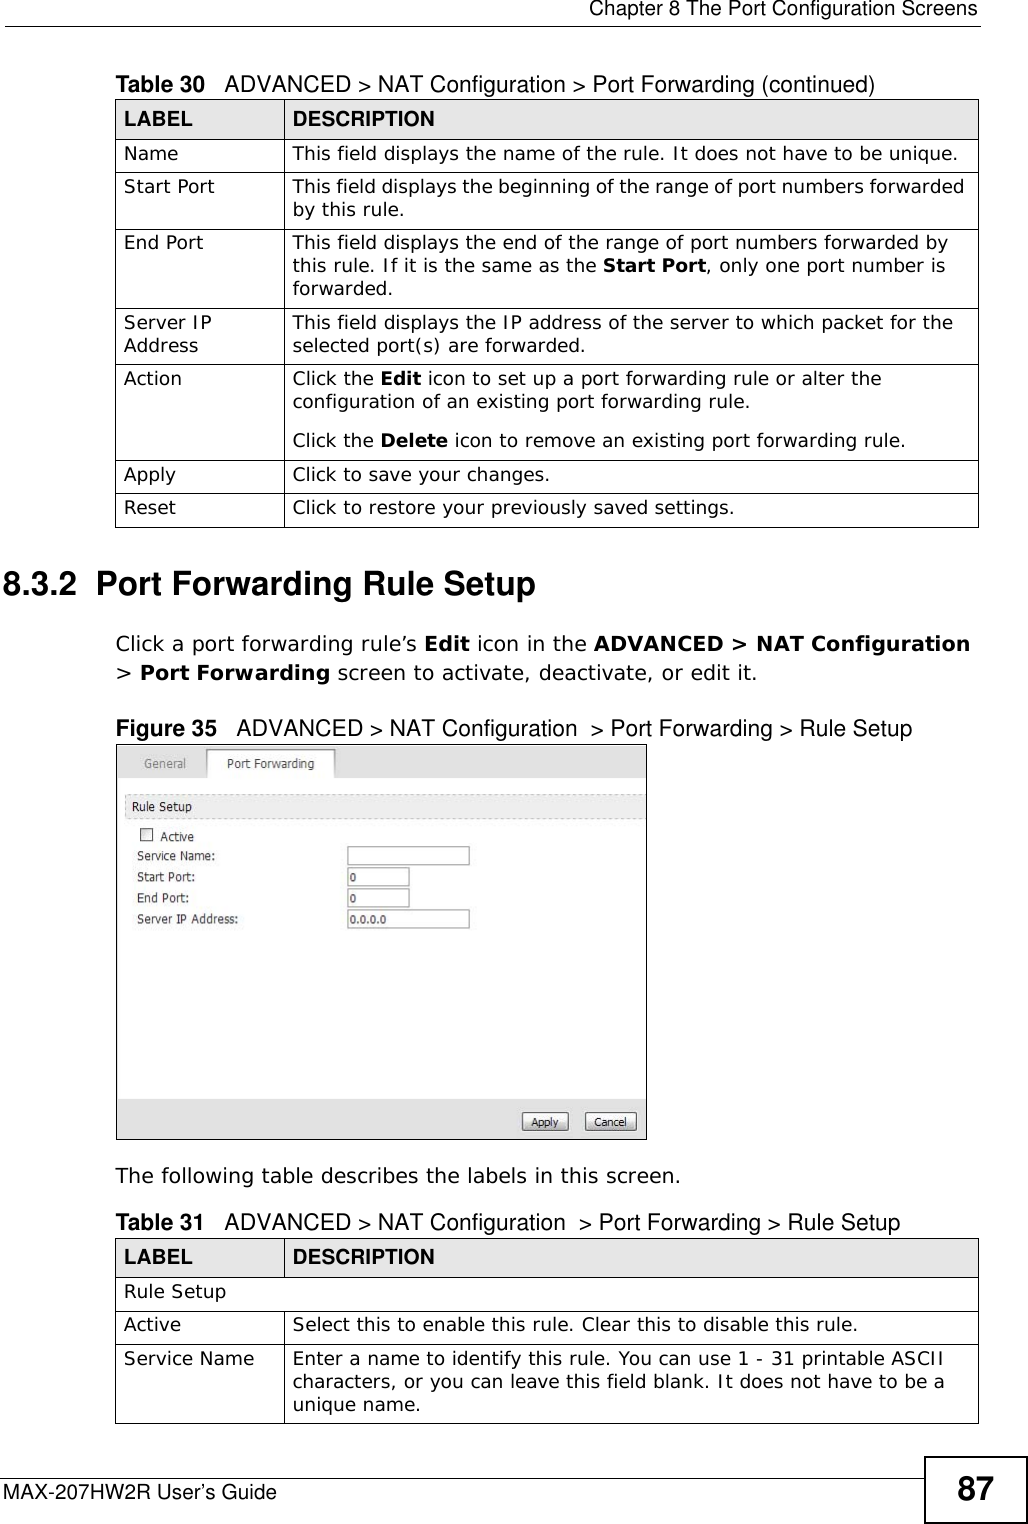  Chapter 8 The Port Configuration ScreensMAX-207HW2R User’s Guide 878.3.2  Port Forwarding Rule SetupClick a port forwarding rule’s Edit icon in the ADVANCED &gt; NAT Configuration &gt; Port Forwarding screen to activate, deactivate, or edit it.Figure 35   ADVANCED &gt; NAT Configuration  &gt; Port Forwarding &gt; Rule SetupThe following table describes the labels in this screen.Name This field displays the name of the rule. It does not have to be unique.Start Port This field displays the beginning of the range of port numbers forwarded by this rule.End Port This field displays the end of the range of port numbers forwarded by this rule. If it is the same as the Start Port, only one port number is forwarded.Server IP Address This field displays the IP address of the server to which packet for the selected port(s) are forwarded.Action Click the Edit icon to set up a port forwarding rule or alter the configuration of an existing port forwarding rule.Click the Delete icon to remove an existing port forwarding rule. Apply Click to save your changes.Reset Click to restore your previously saved settings.Table 30   ADVANCED &gt; NAT Configuration &gt; Port Forwarding (continued)LABEL DESCRIPTIONTable 31   ADVANCED &gt; NAT Configuration  &gt; Port Forwarding &gt; Rule SetupLABEL DESCRIPTIONRule SetupActive Select this to enable this rule. Clear this to disable this rule.Service Name Enter a name to identify this rule. You can use 1 - 31 printable ASCII characters, or you can leave this field blank. It does not have to be a unique name.